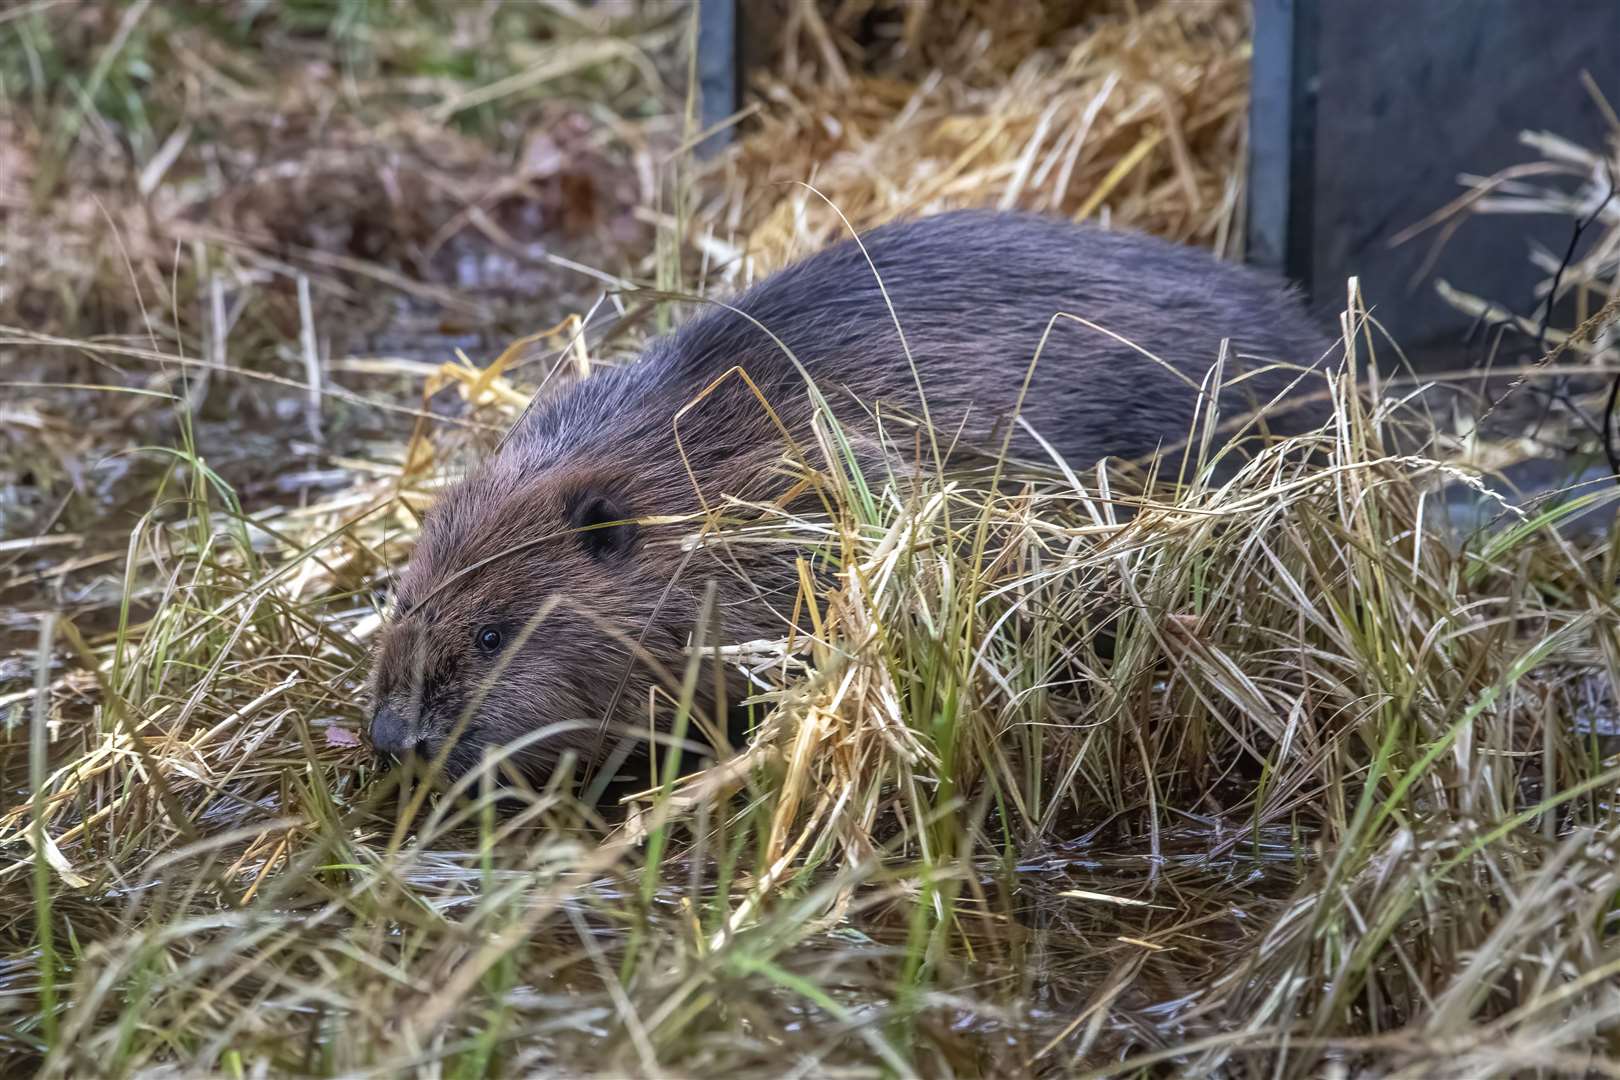 A female beaver leaves the crate and begins to explore her new home in the strath.